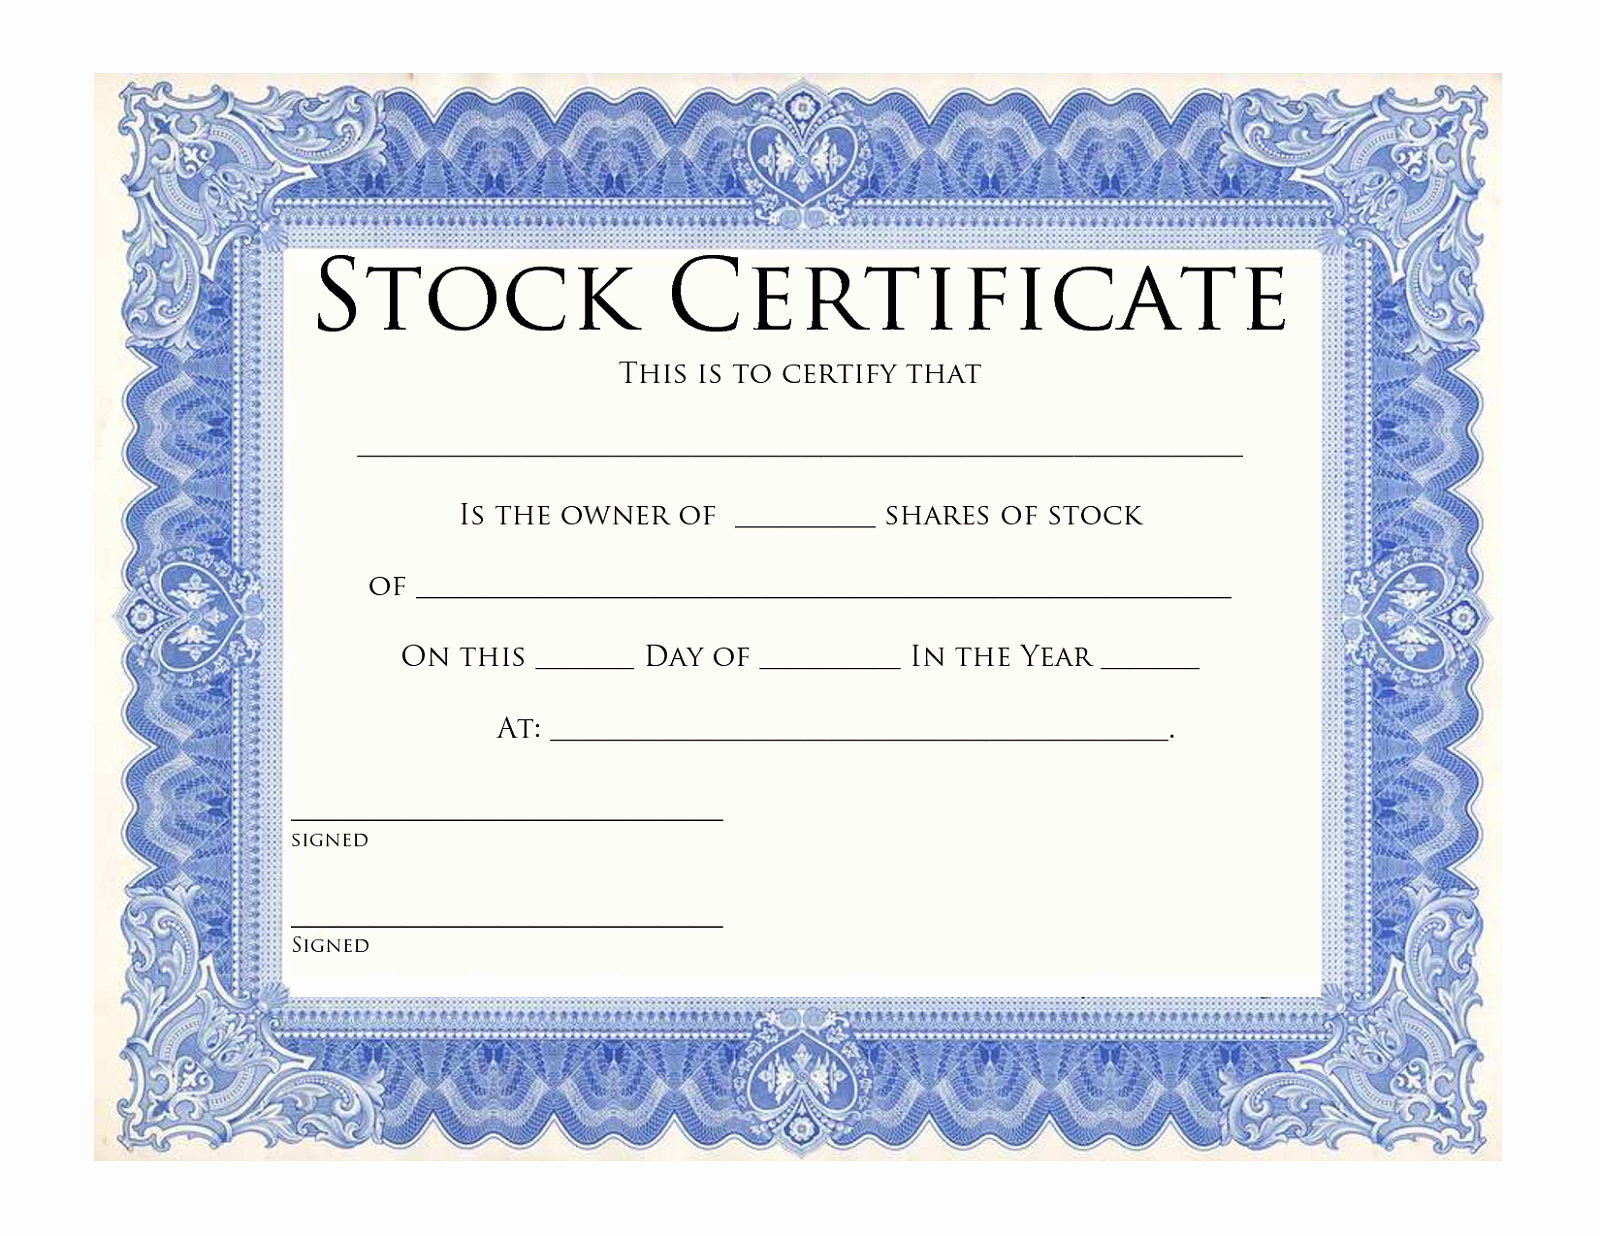 Llc Share Certificate Template Best Of Stock Certificate Templates to Print